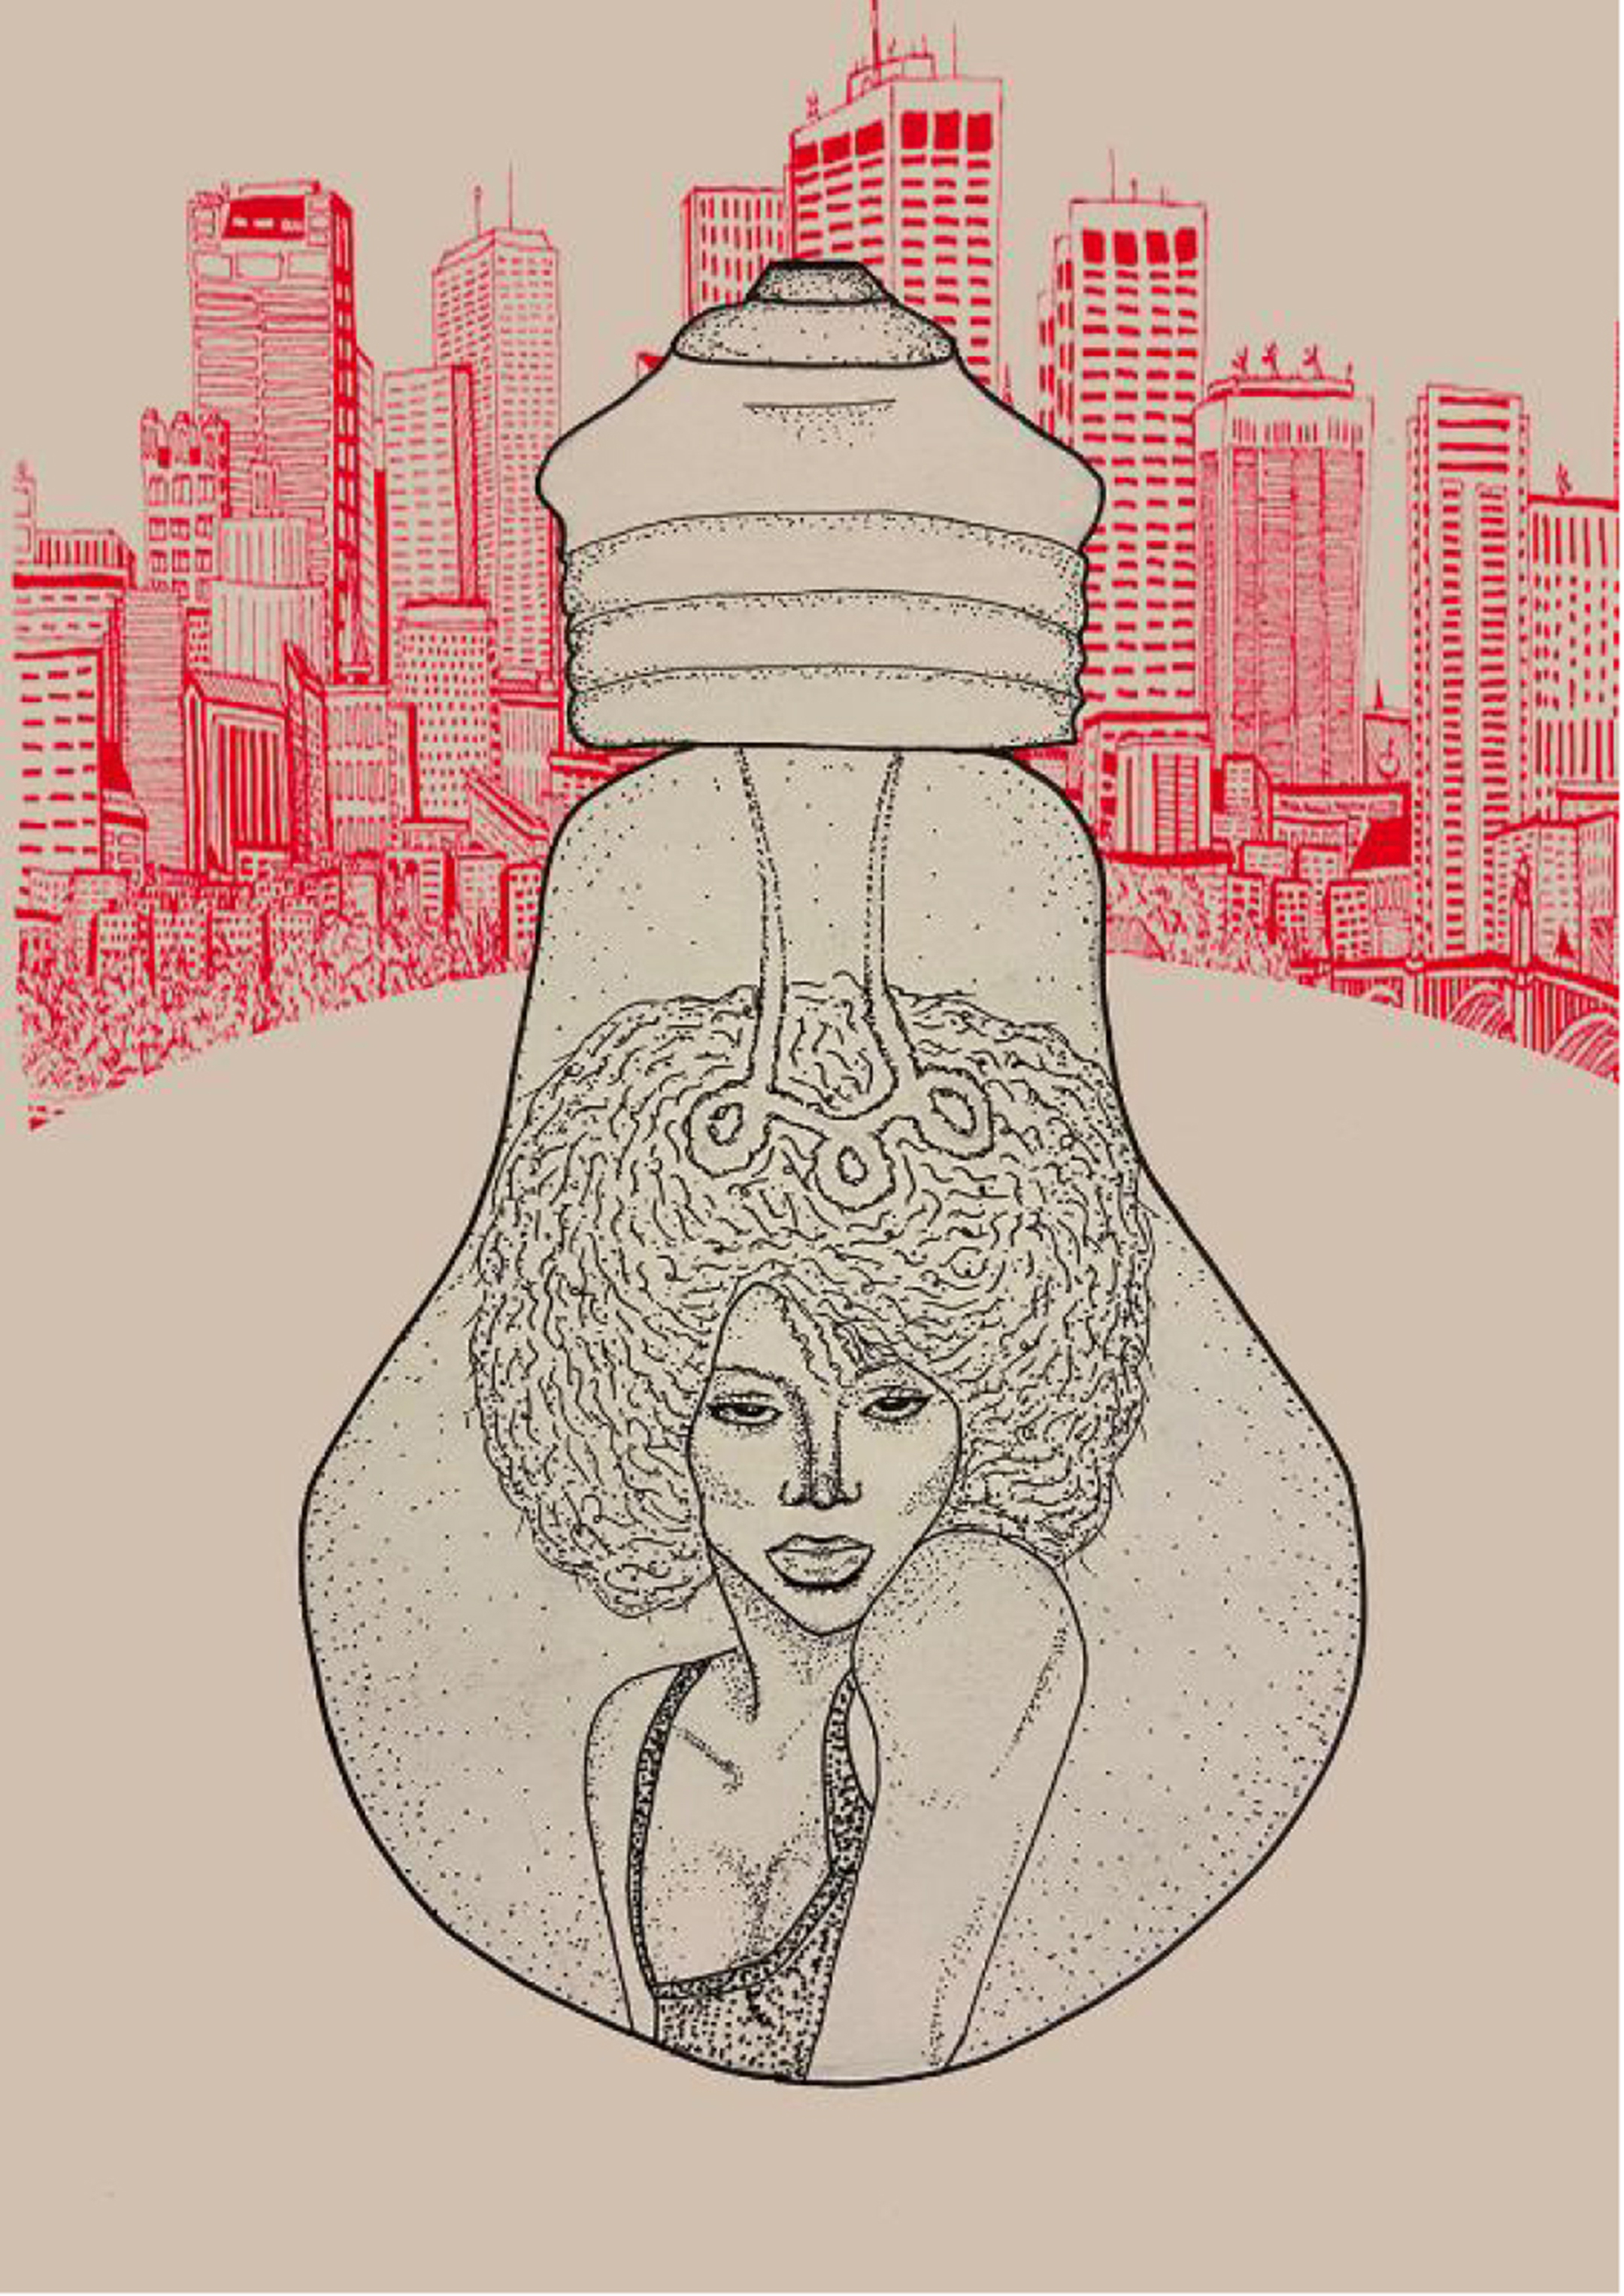 Black and white illustration of a woman in a light bulb with a red city skyline in the background